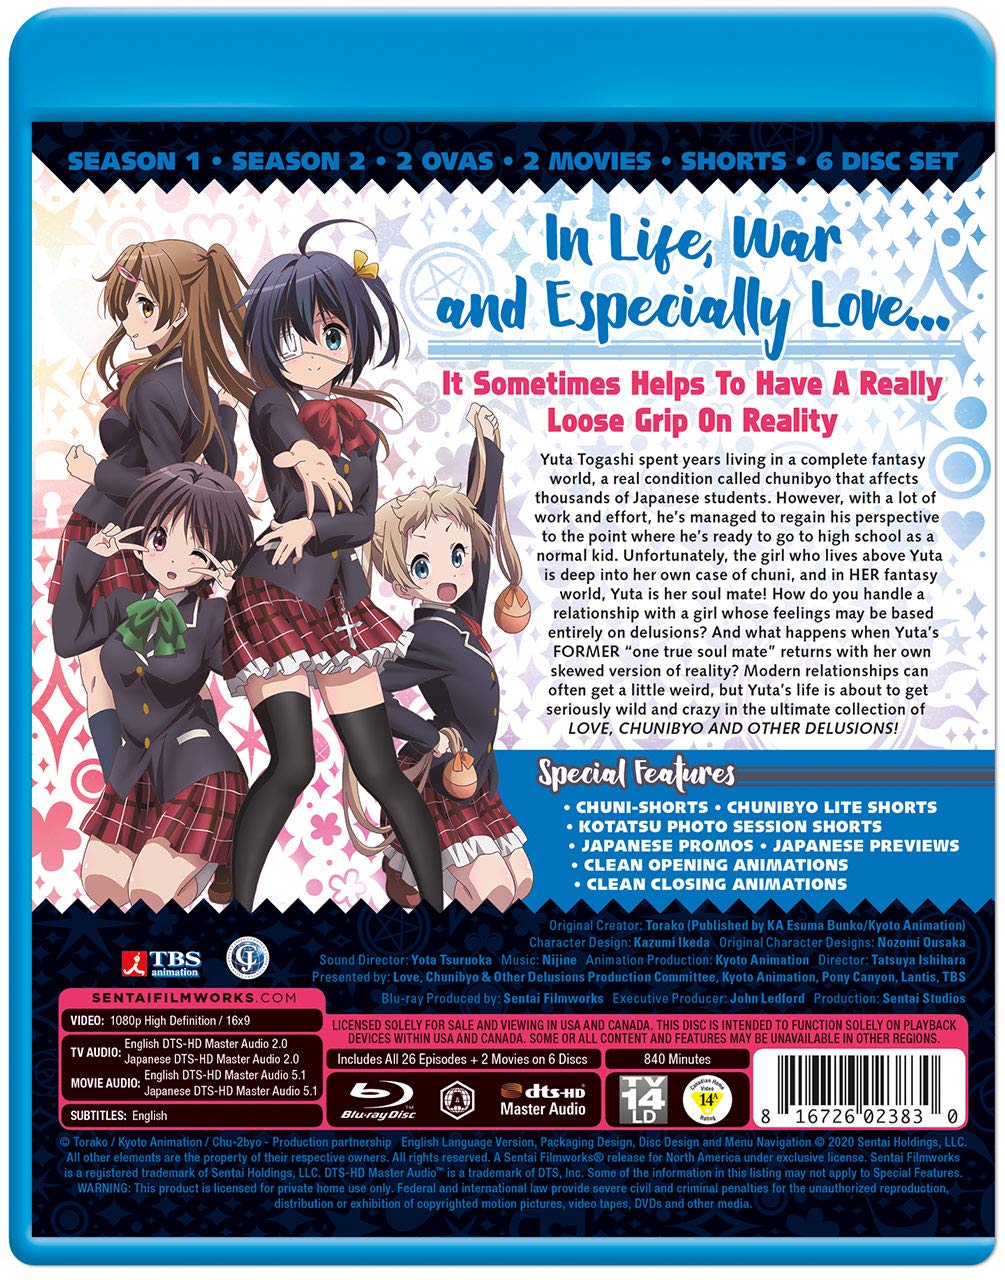 Best Buy: Love, Chunibyo & Other Delusions!: Take On Me [Blu-ray]